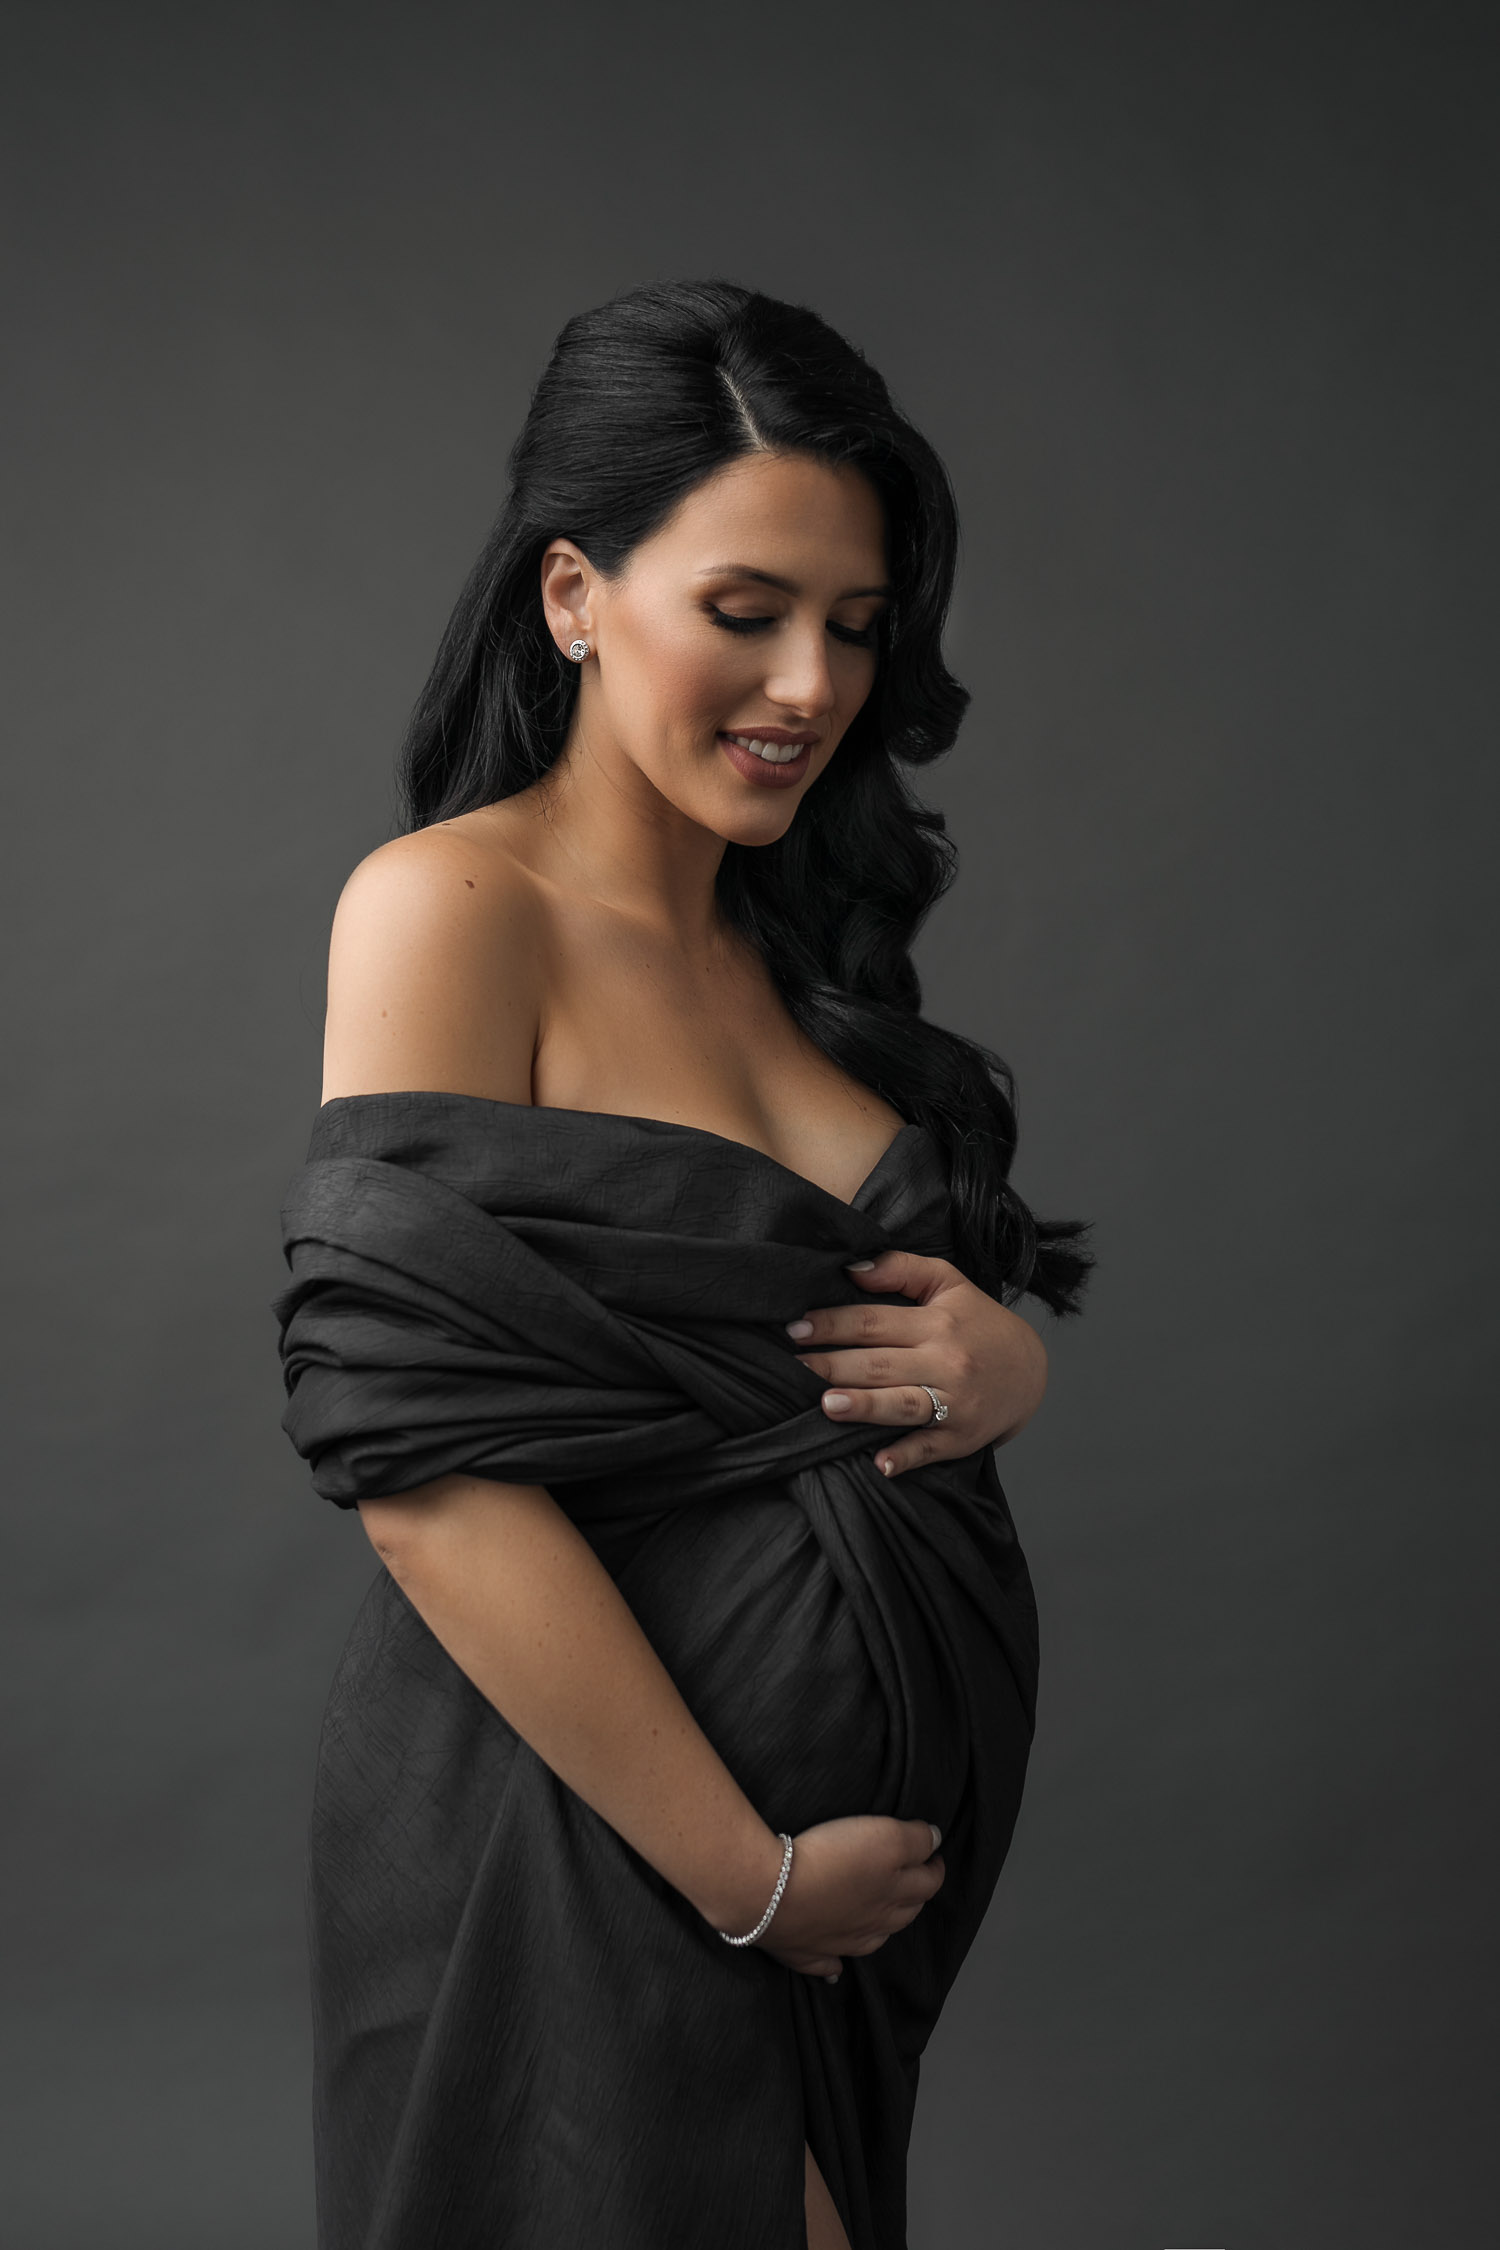 Classic and timeless maternity photography